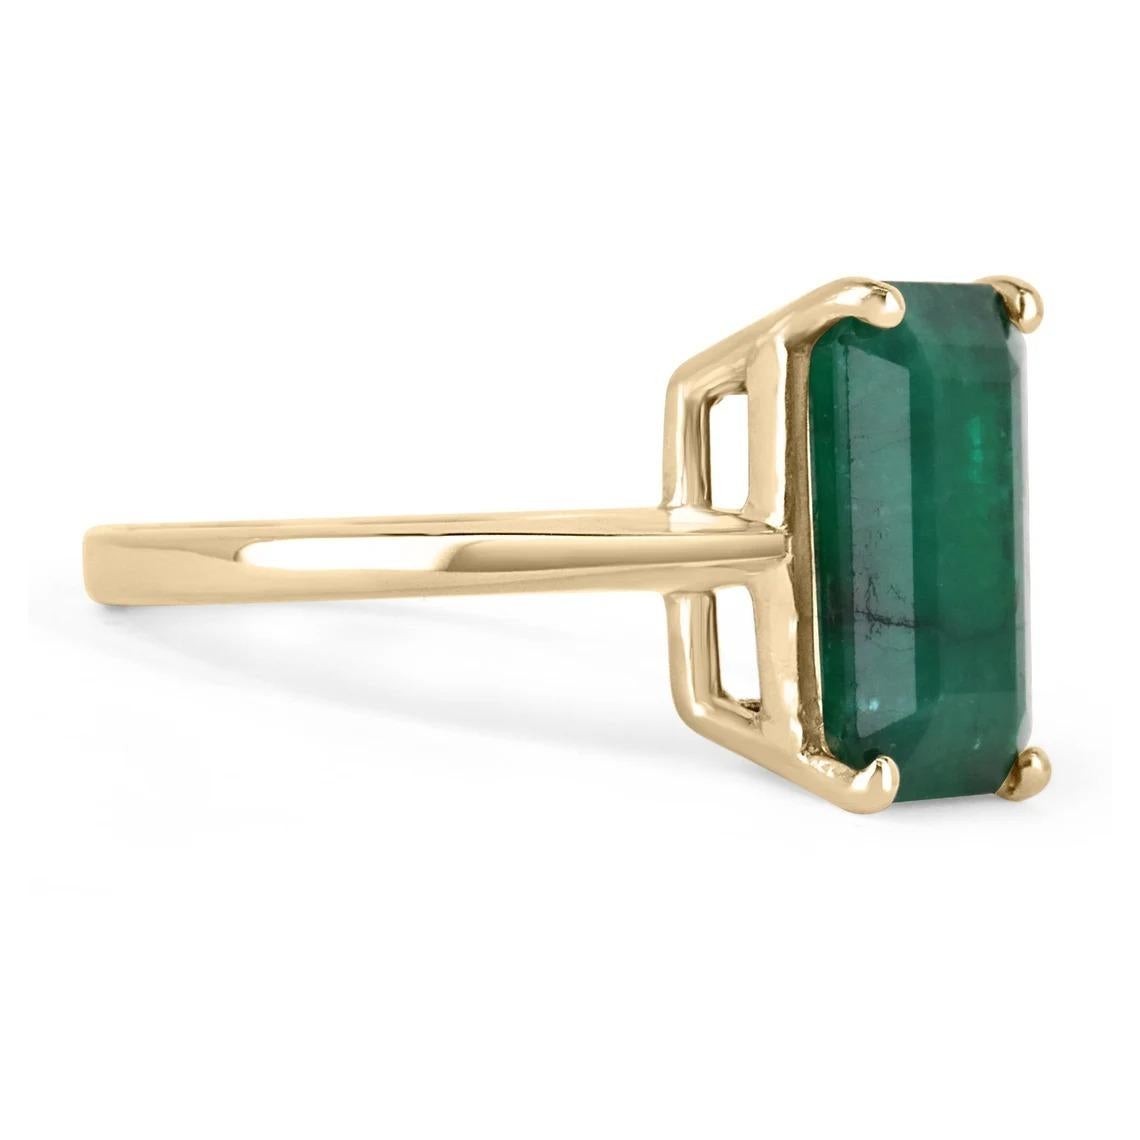 Displayed is a classic Brazilian emerald solitaire emerald-cut engagement ring/right-hand ring in 14K yellow gold. This gorgeous solitaire ring carries a full 4.46-carat emerald in an offset four-prong setting. Fully faceted, this gemstone showcases